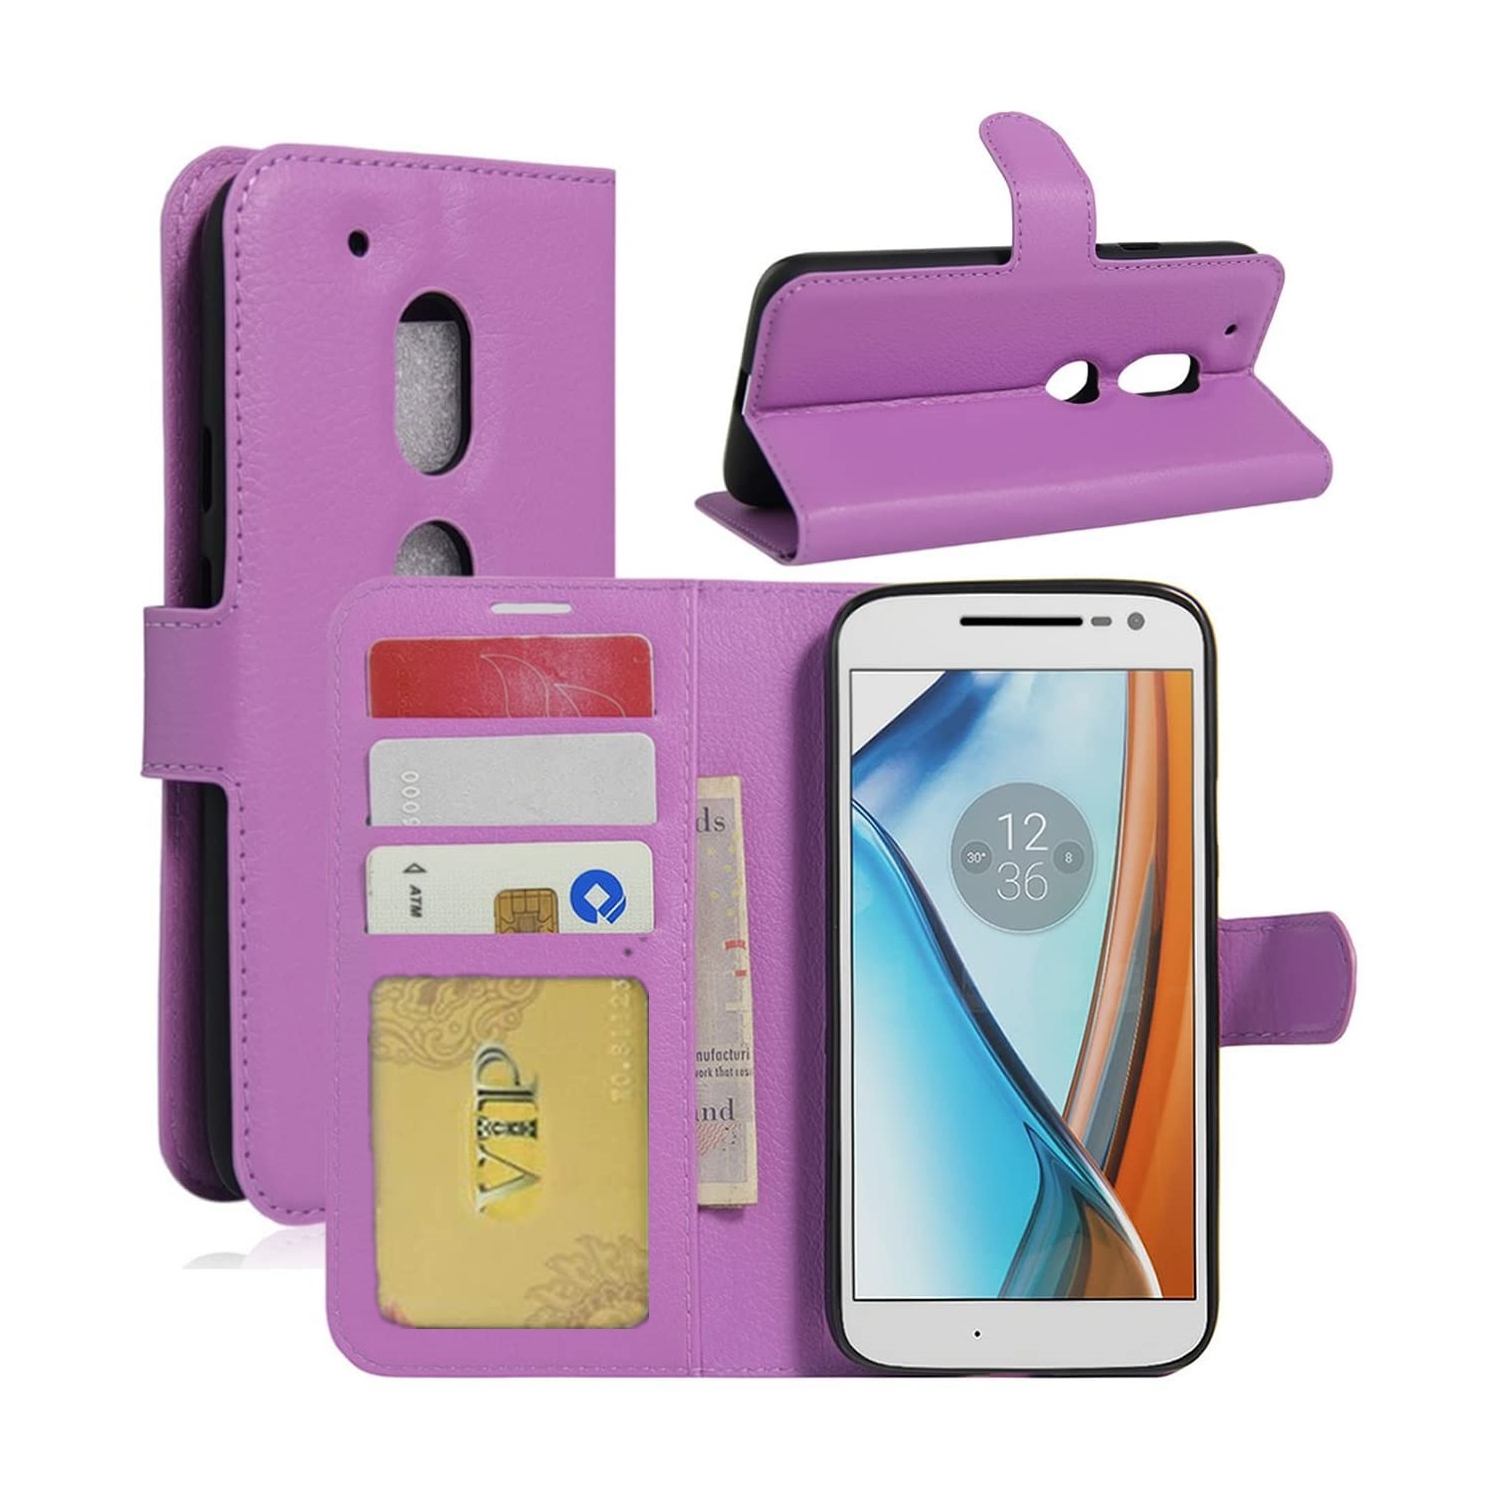 [CS] Motorola Moto G6 Play Case, Magnetic Leather Folio Wallet Flip Case Cover with Card Slot, Purple